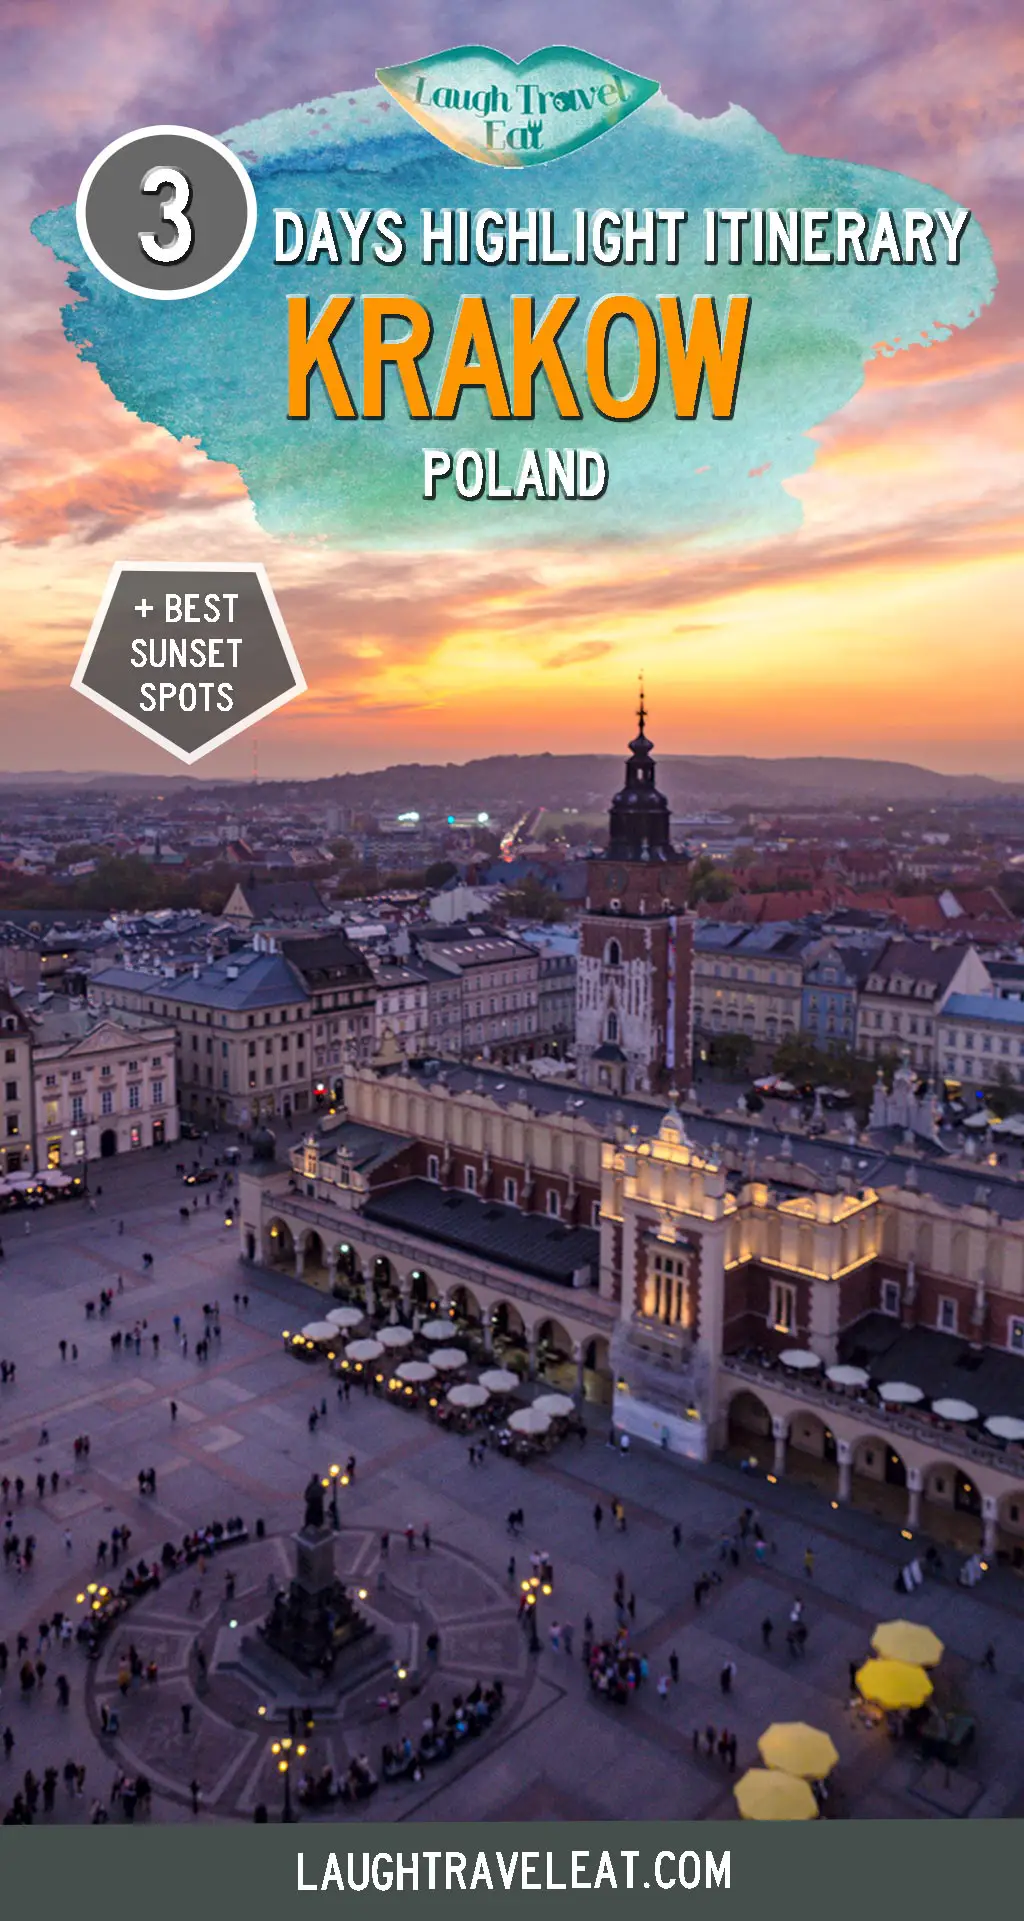 Krakow is one of the best cities to visit in Poland – why? It was the capital before Warsaw and one of the few cities whose old town remain undamaged in WWII. It’s the final resting place of many Polish monarchs with a rich Jewish past. The city has surprised me with its historical and colourful architecture and affordability, and three days here is a perfect amount of time to see the highlights #Krakow #Poland